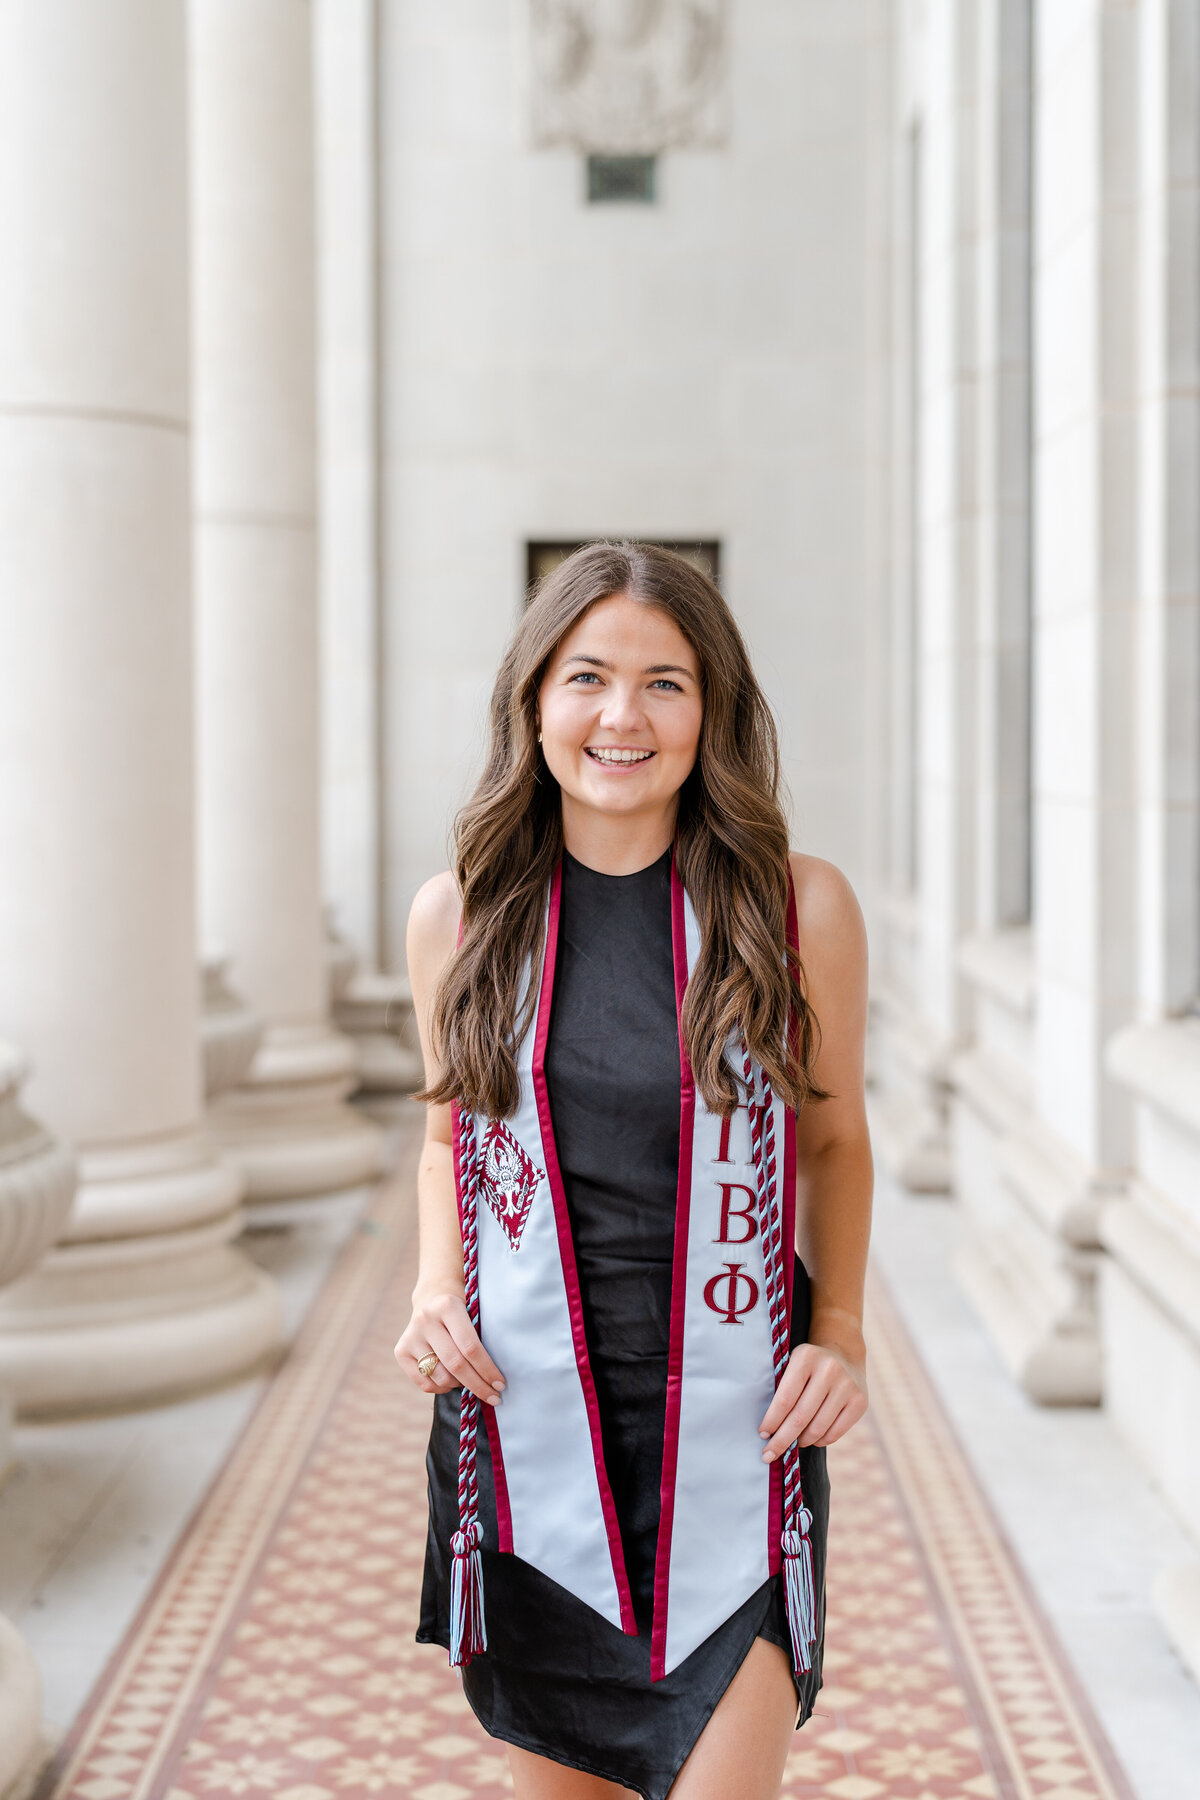 Texas A&M senior girl smiling with Pi Phi sorority stole and cords on and a black dress in the Administration Building columns